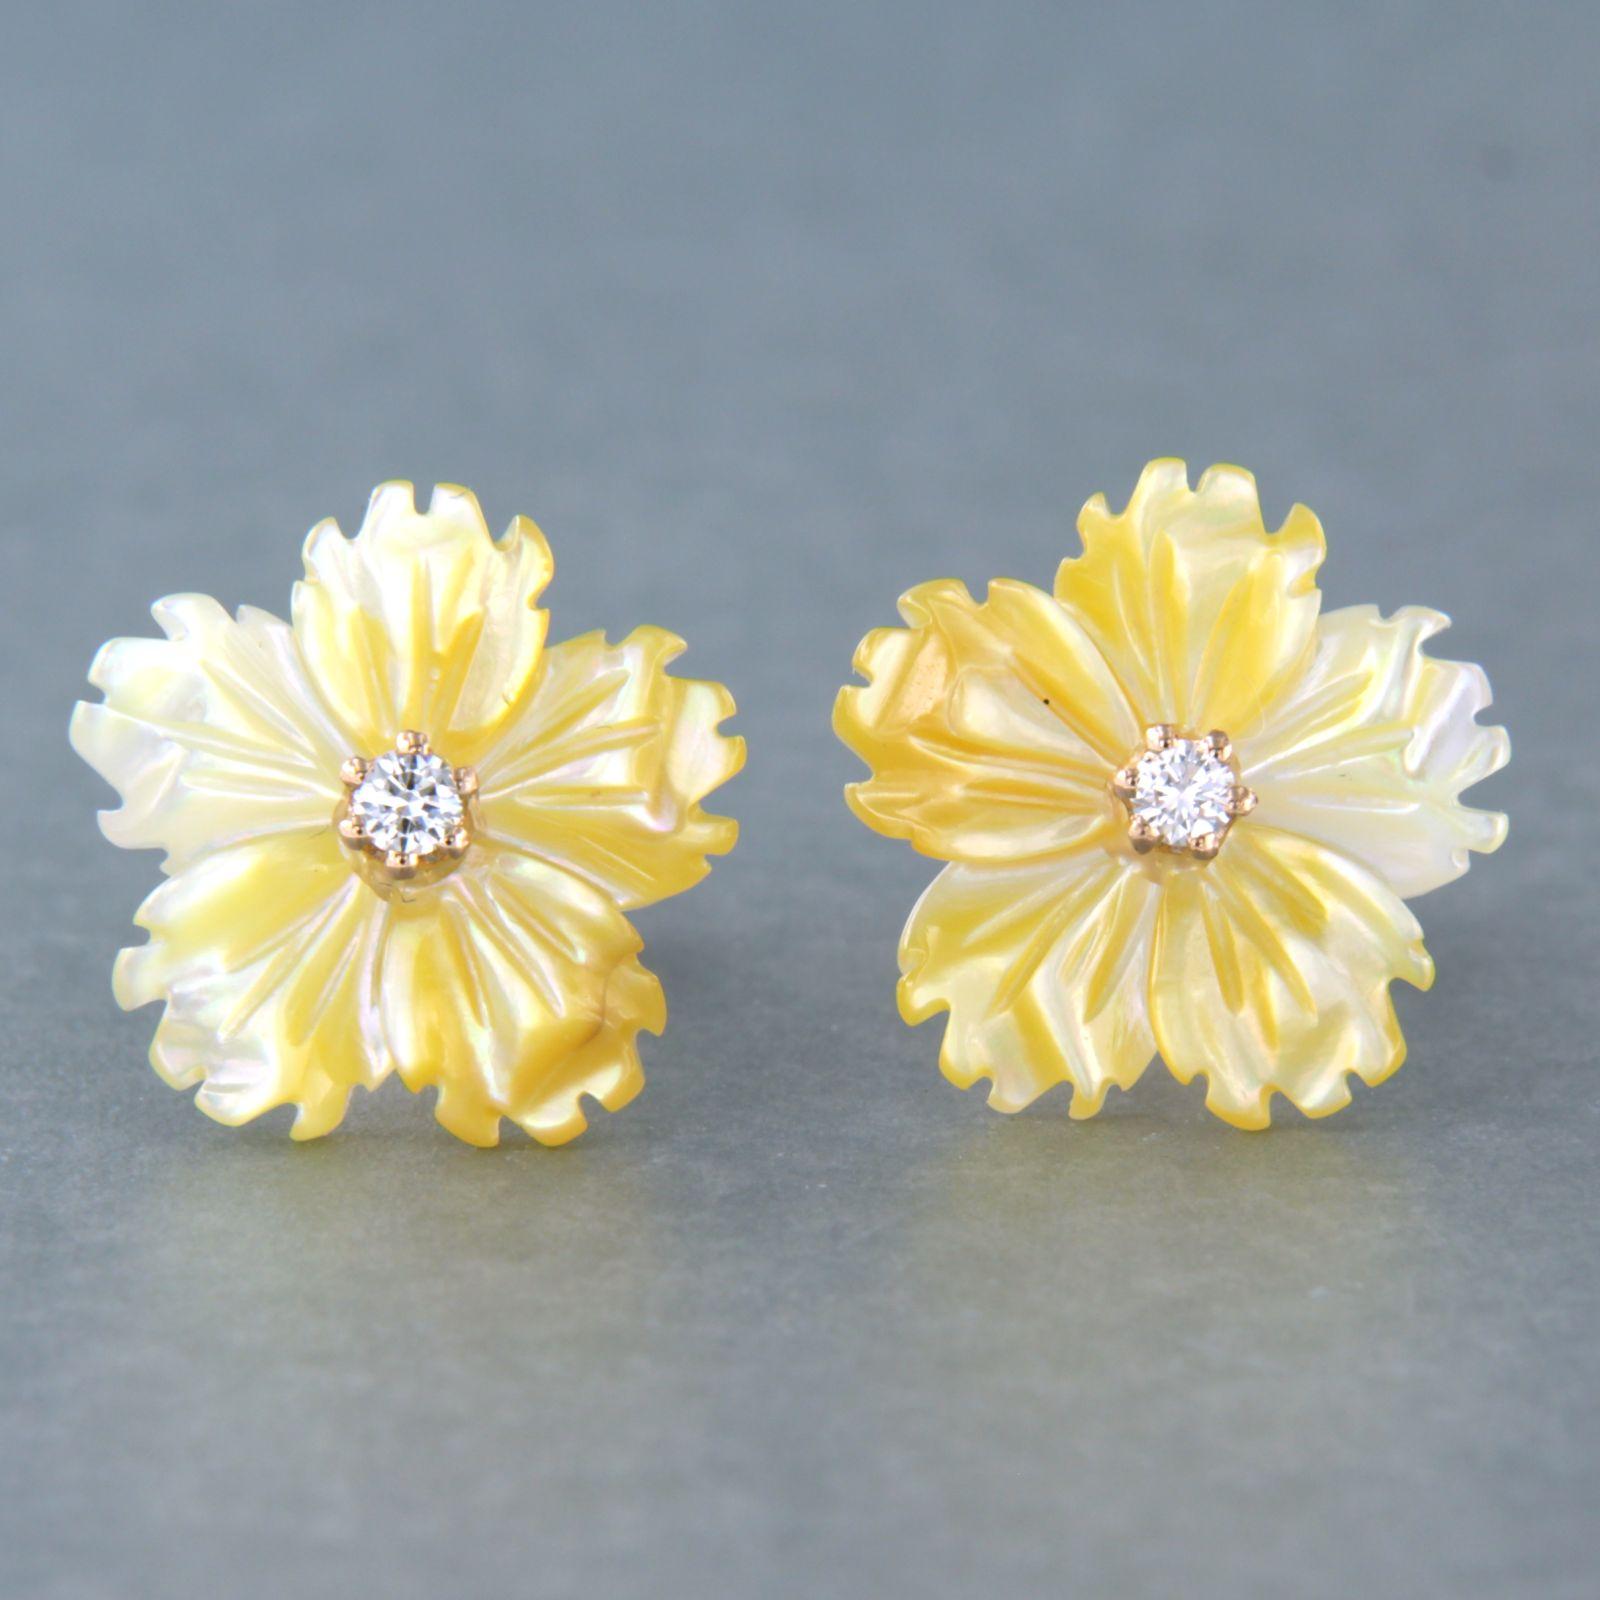 18k pink gold ear studs with flower head, cut yellow agate and brilliant cut diamond, approximately 0.08 ct in total - G/H - VS/SI

detailed description:

the top of the ear stud is 1.4 cm wide

weight 1.9 grams

set with

- 2 x 1.4 mm flower head